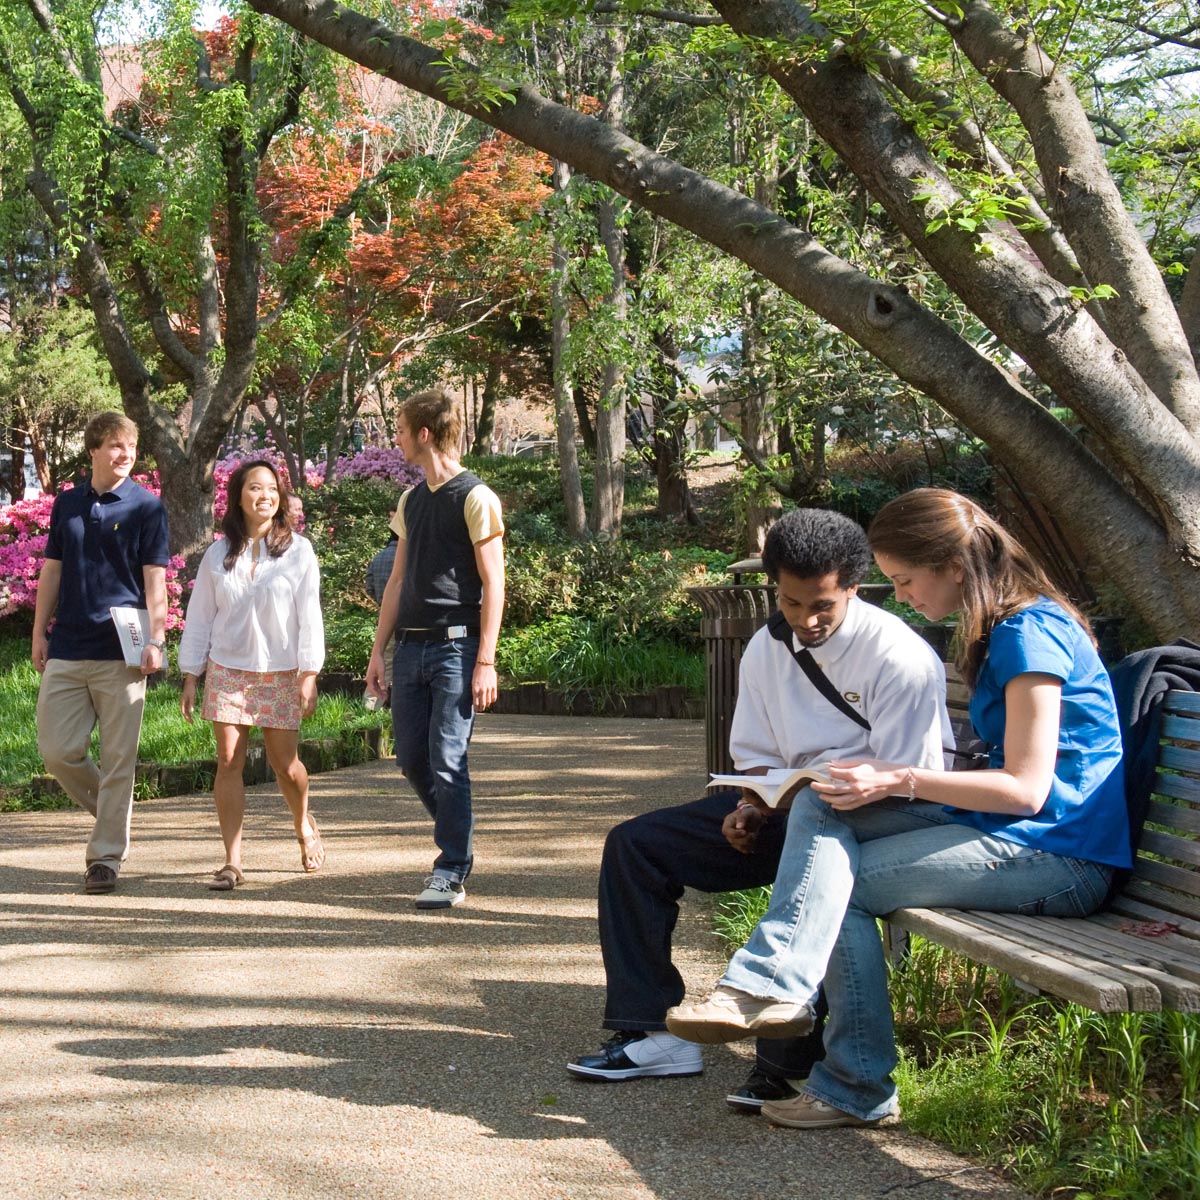 Students on campus in the spring